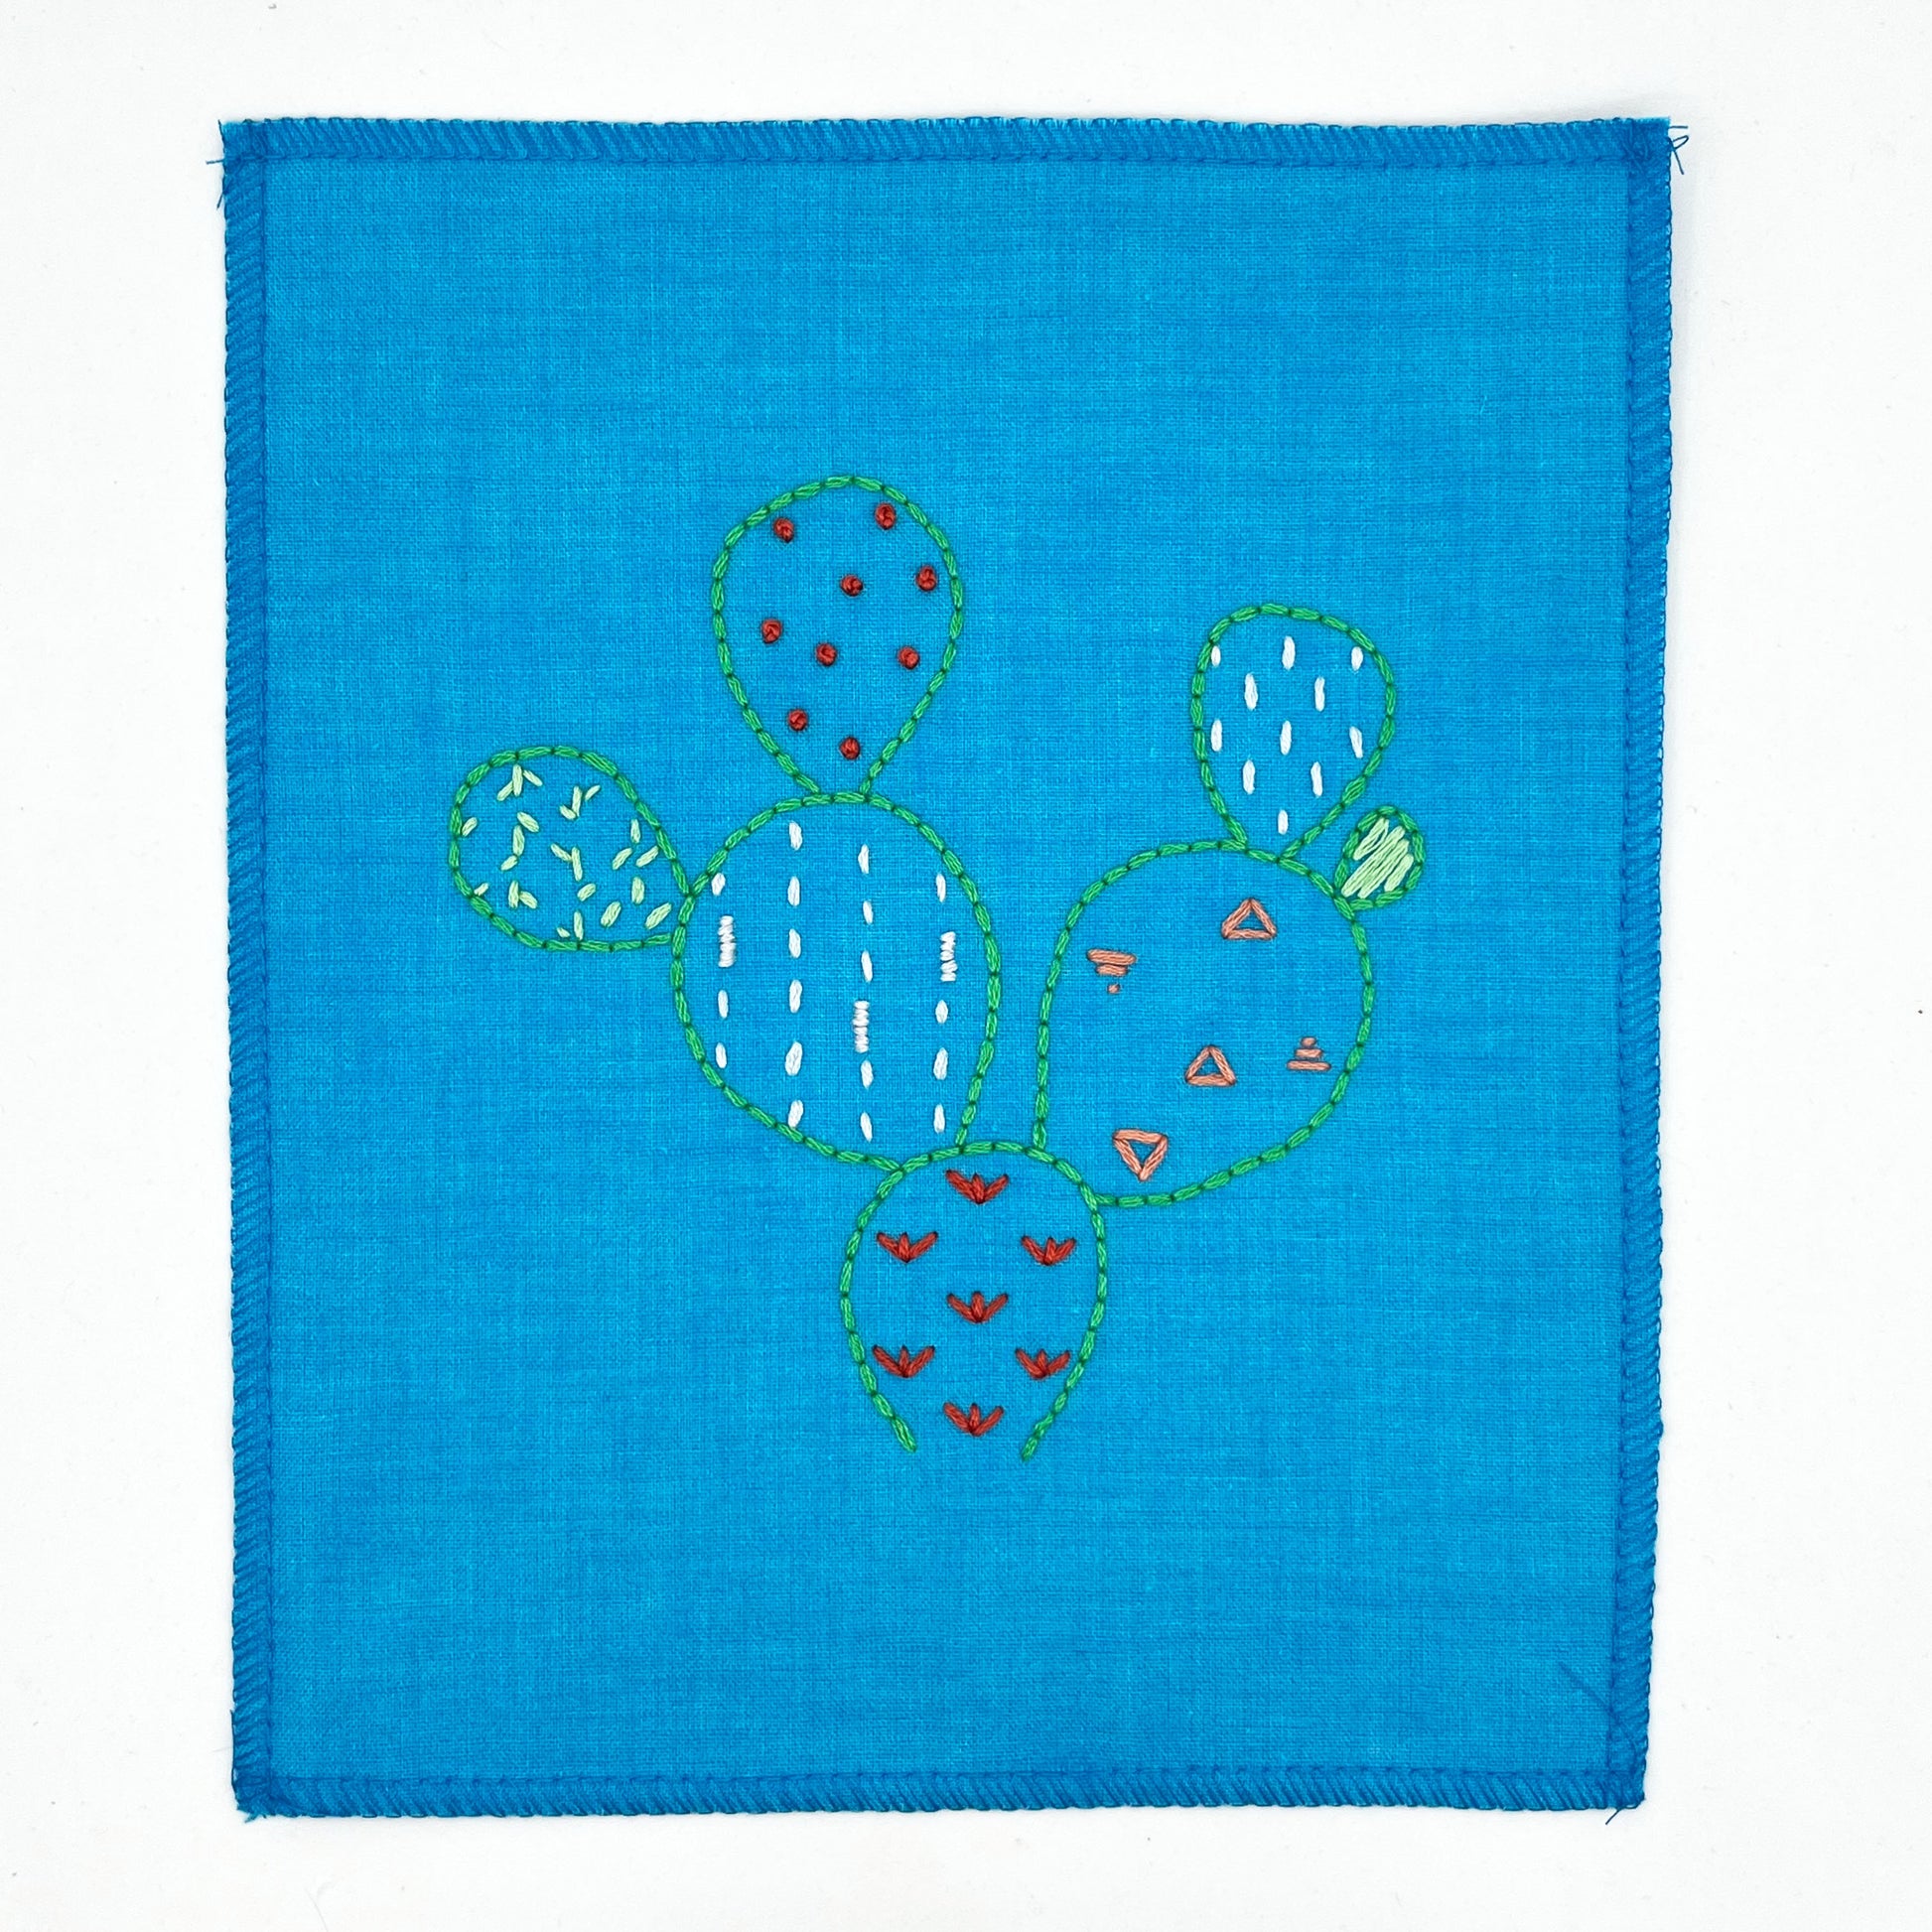 a small bright blue fabric wall hanging, hand embroidered with the outline of a prickly pear cactus in green, each pad filled with different stitches like french knots, running stitches and triangles, in different colors, on a white background